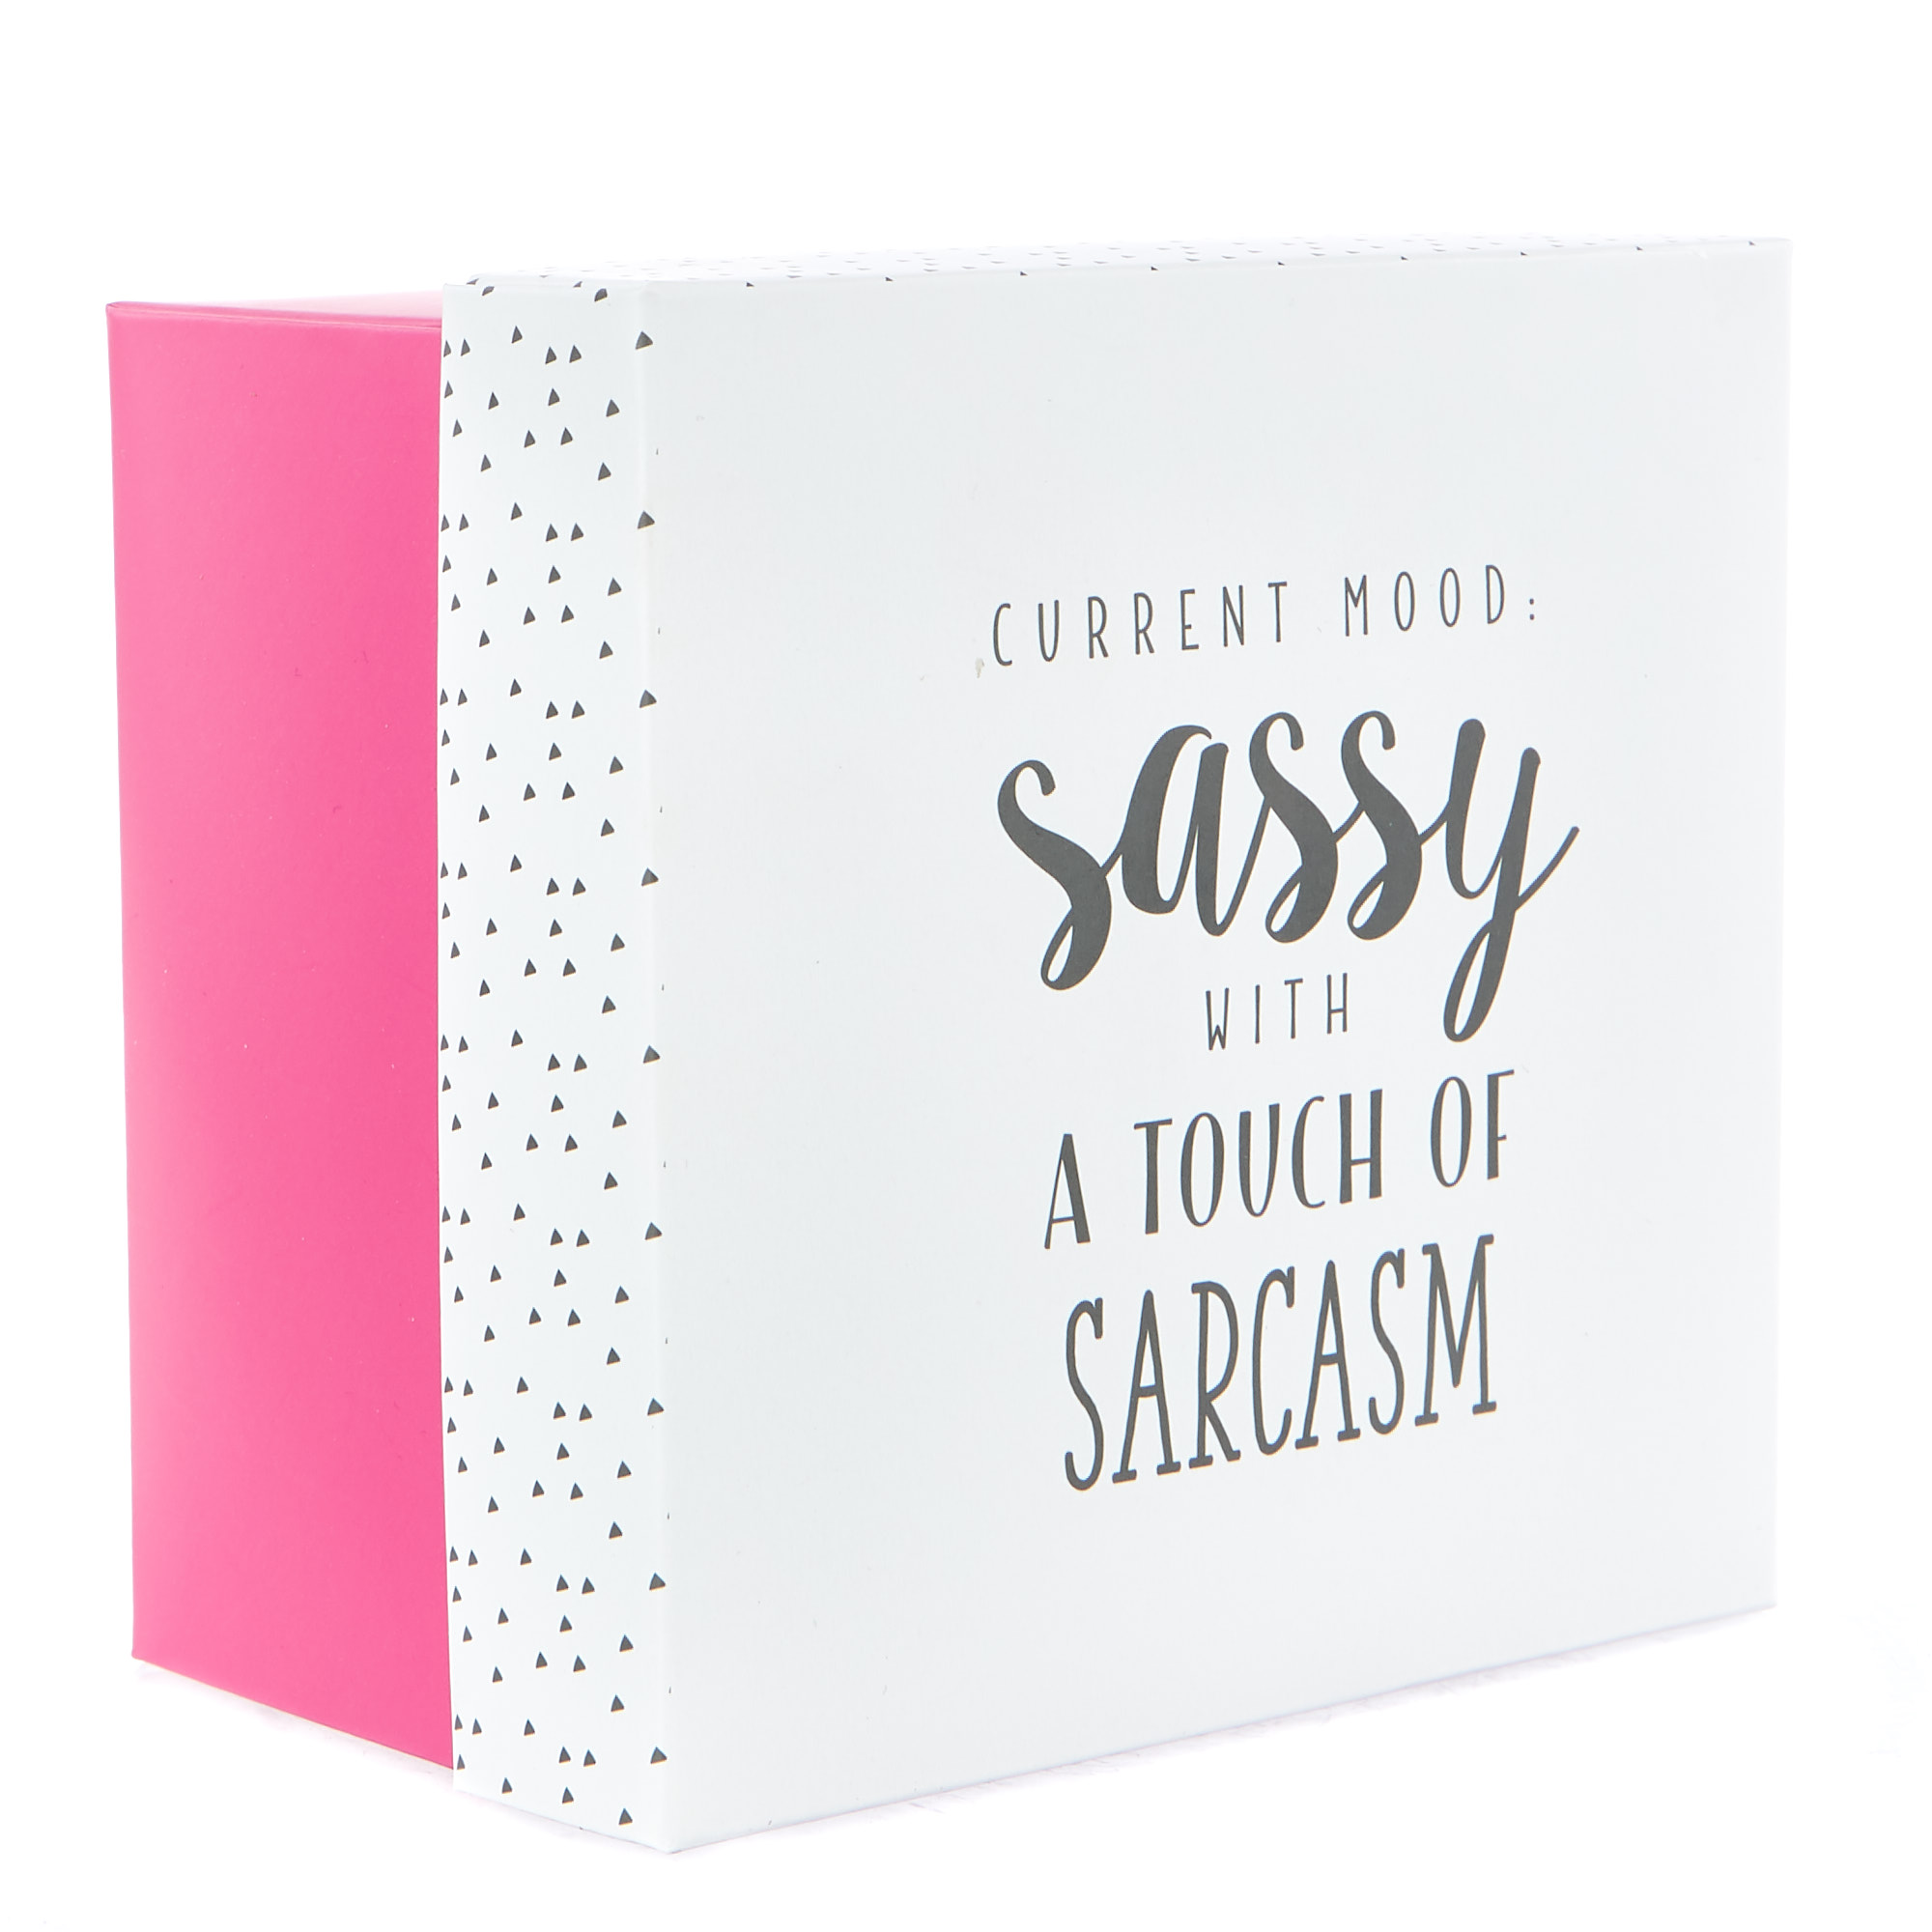 Sassy With A Touch Of Sarcasm Mug